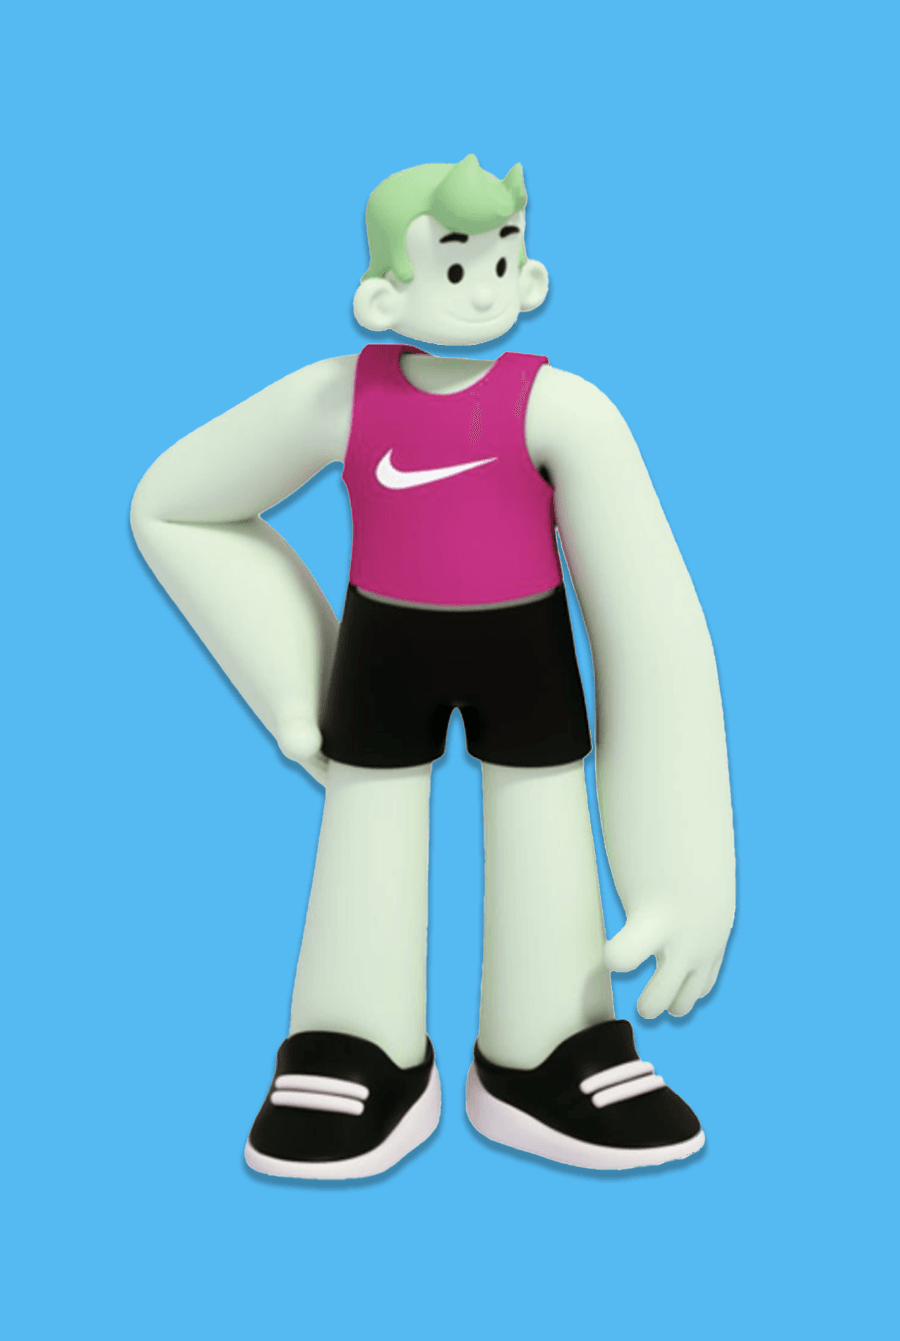 Avatar wearing nike tank top, shorts and black sneakers